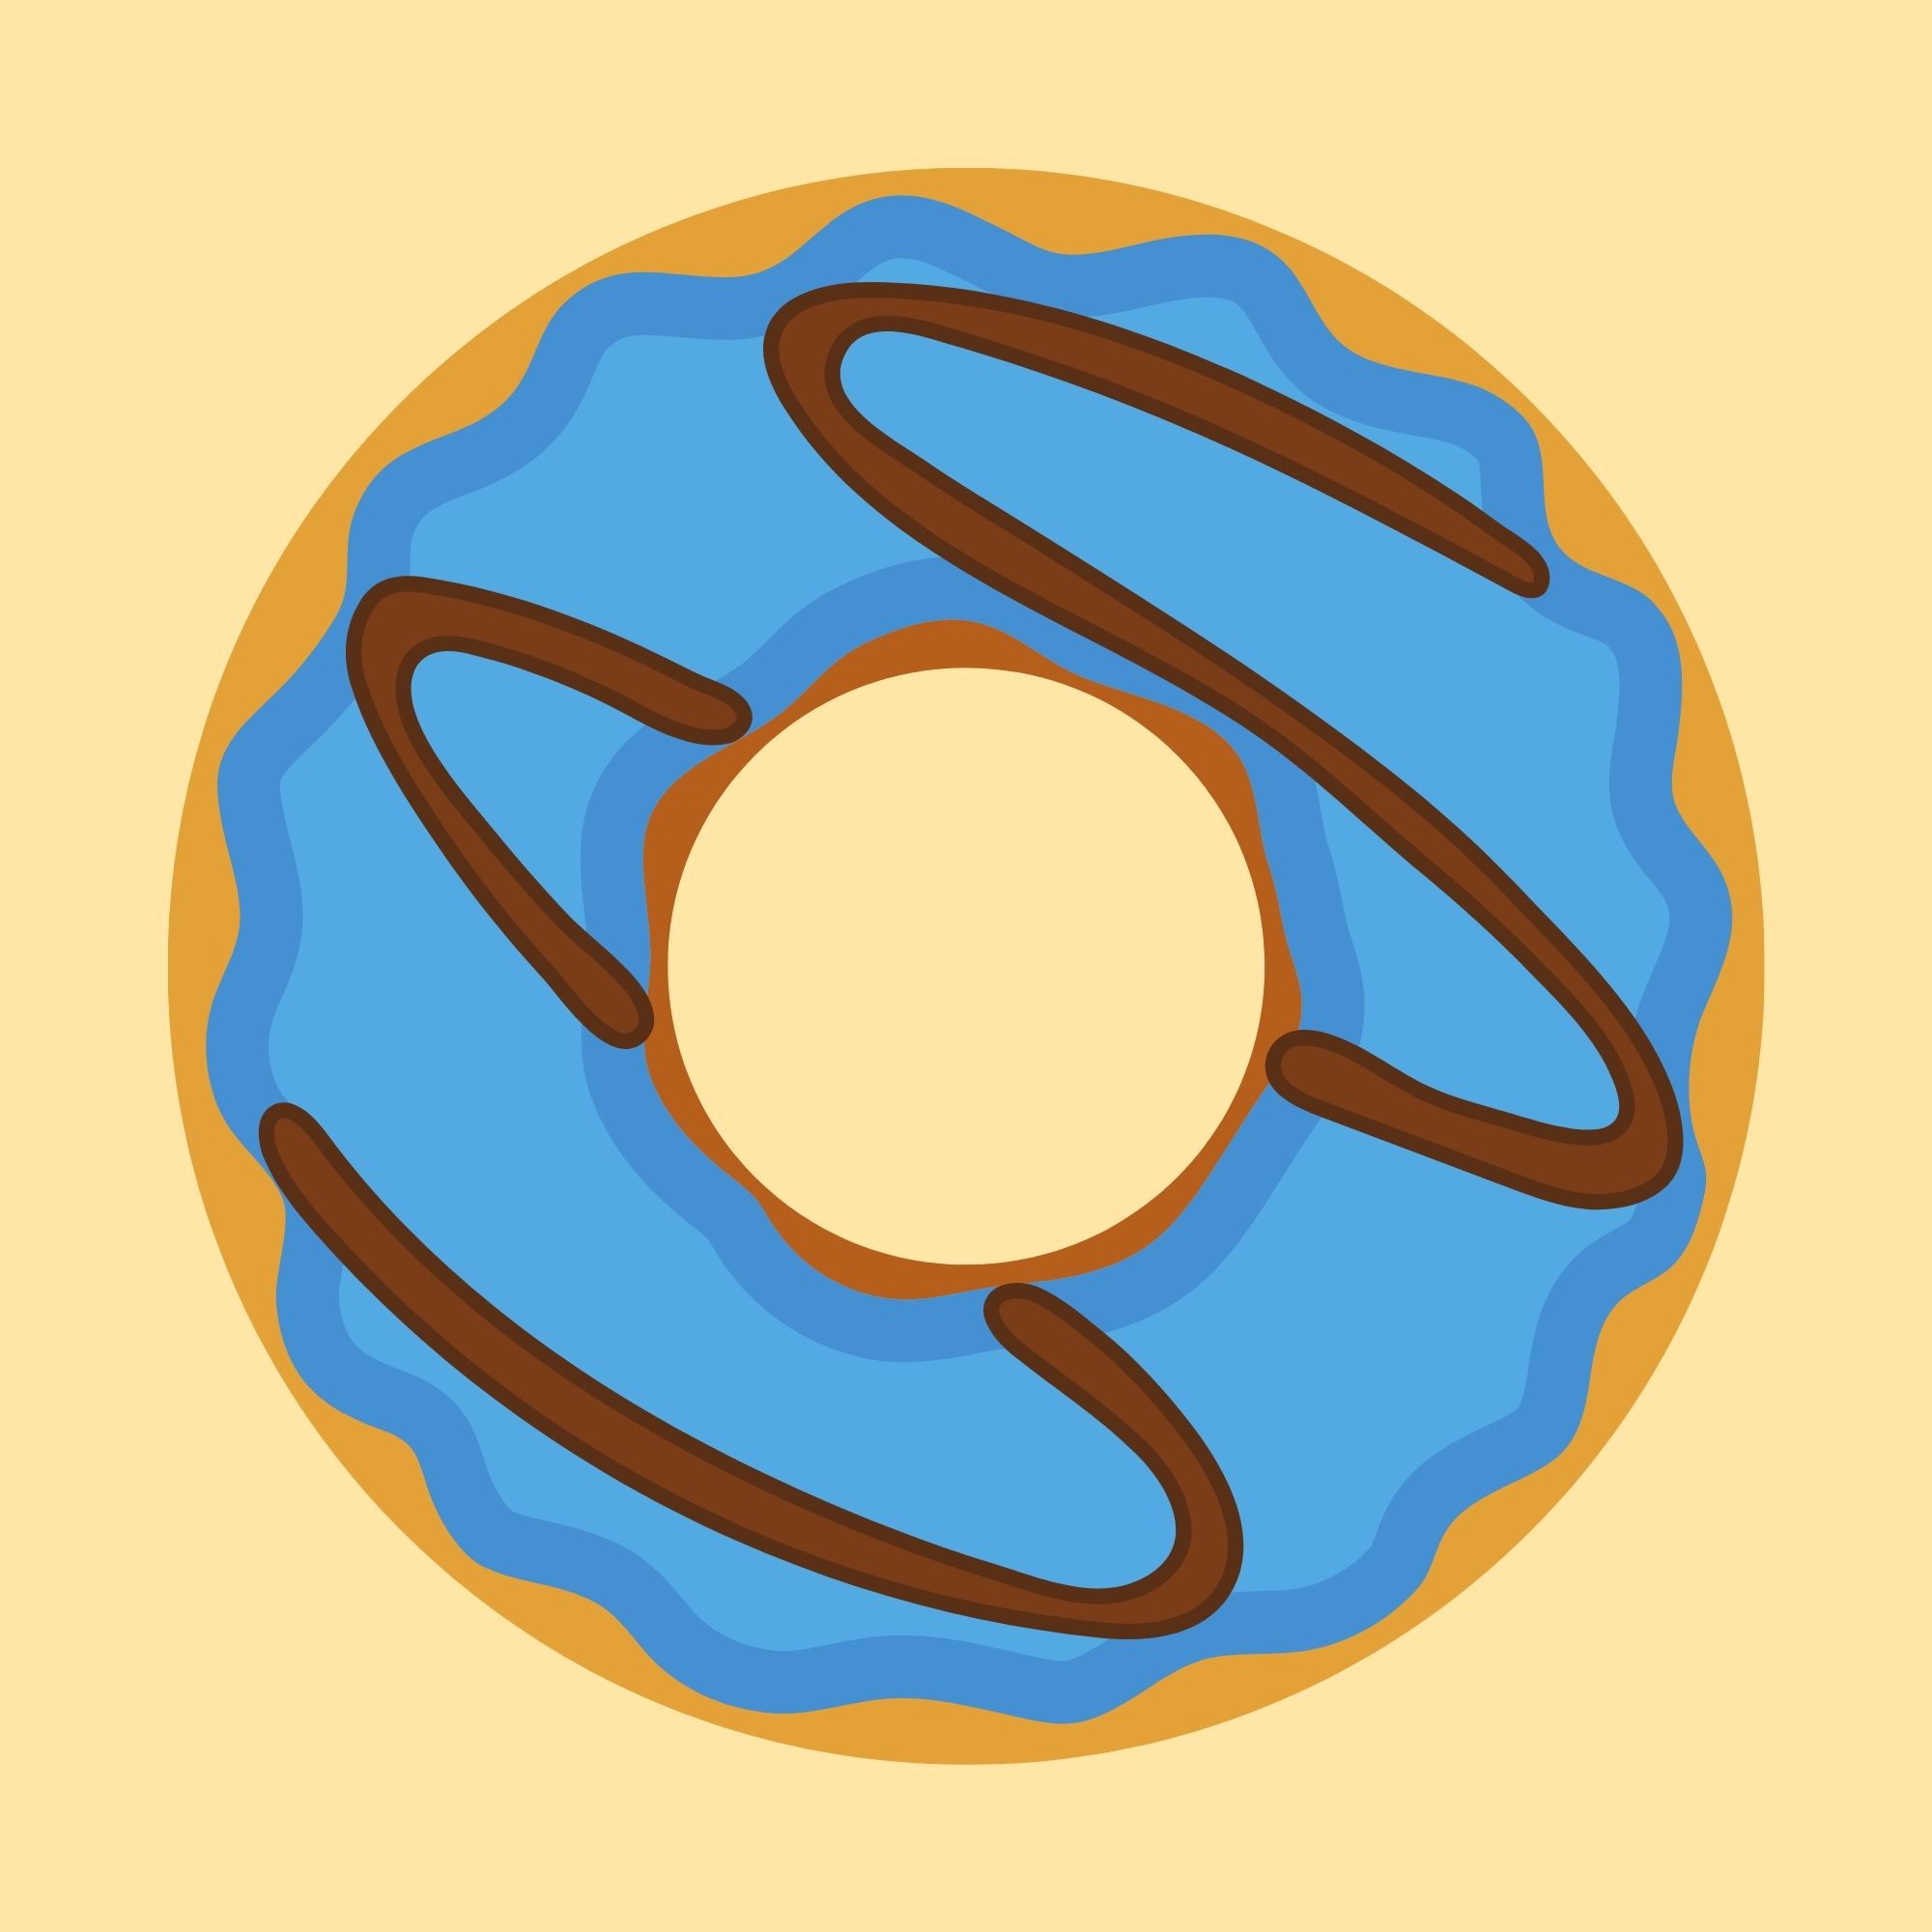 Donut #8 - Poly Donuts | OpenSea